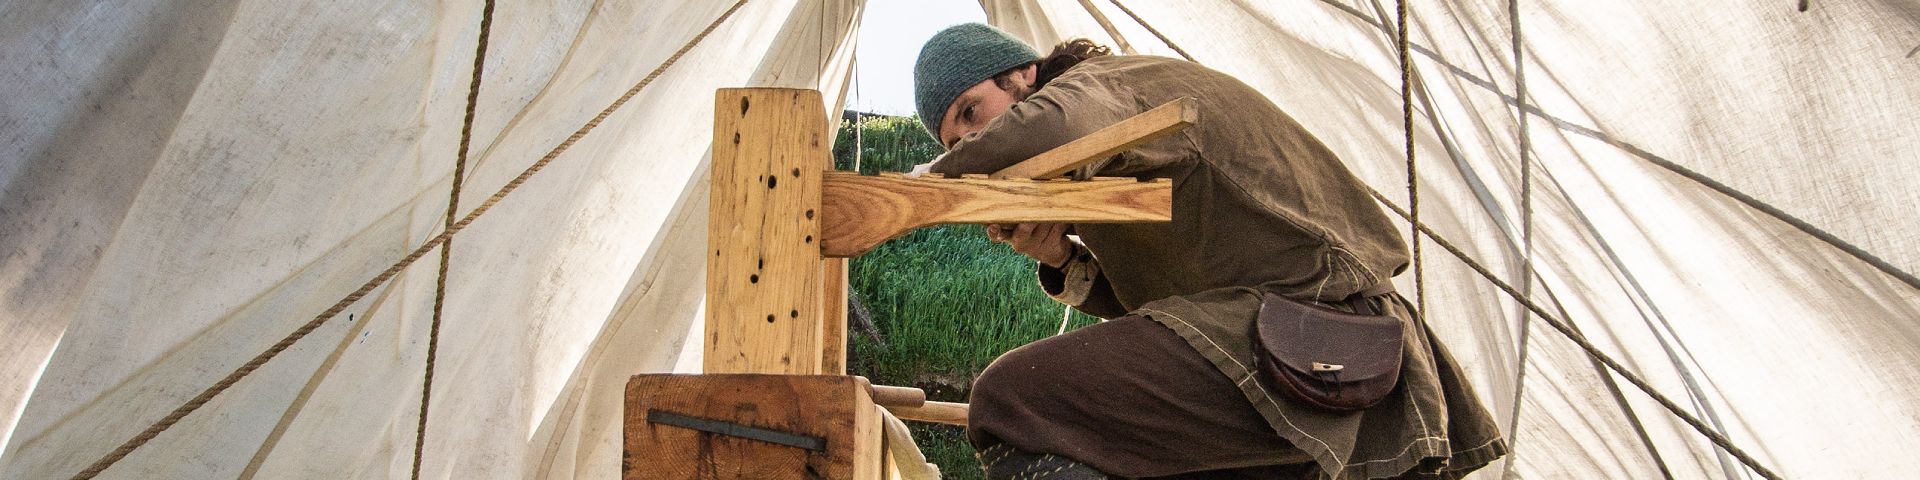 A Parks Canada interpreter in Viking costume carves wood at L’Anse aux Meadows National Historic Site